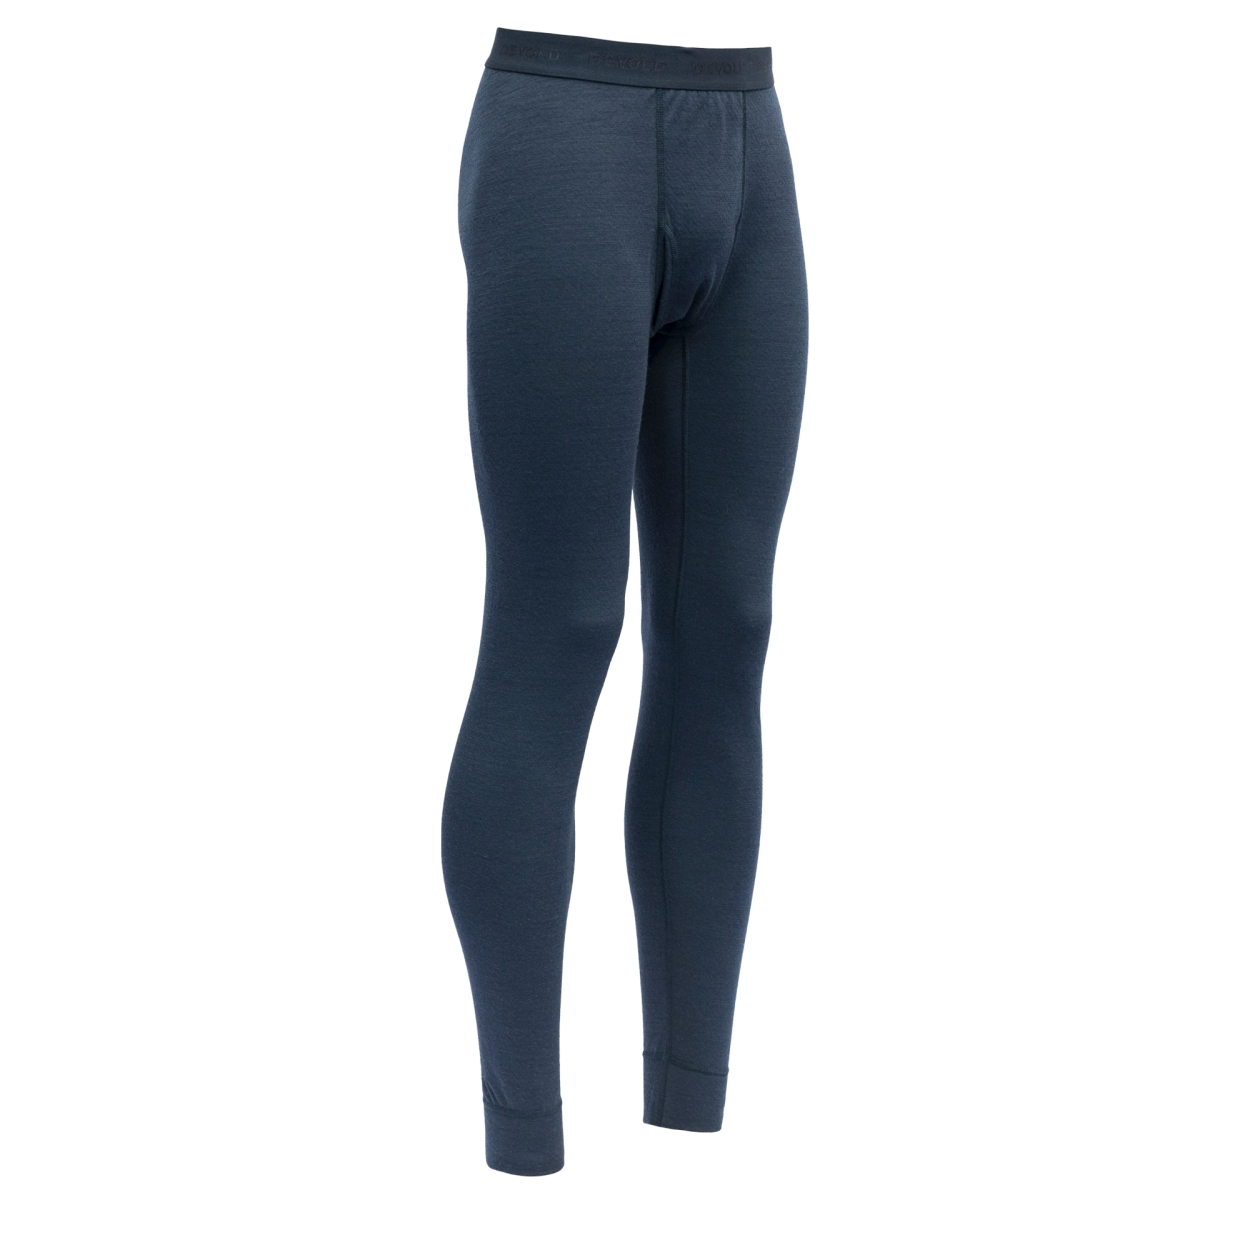 Duo Active Man Long Johns W/Fly, ink